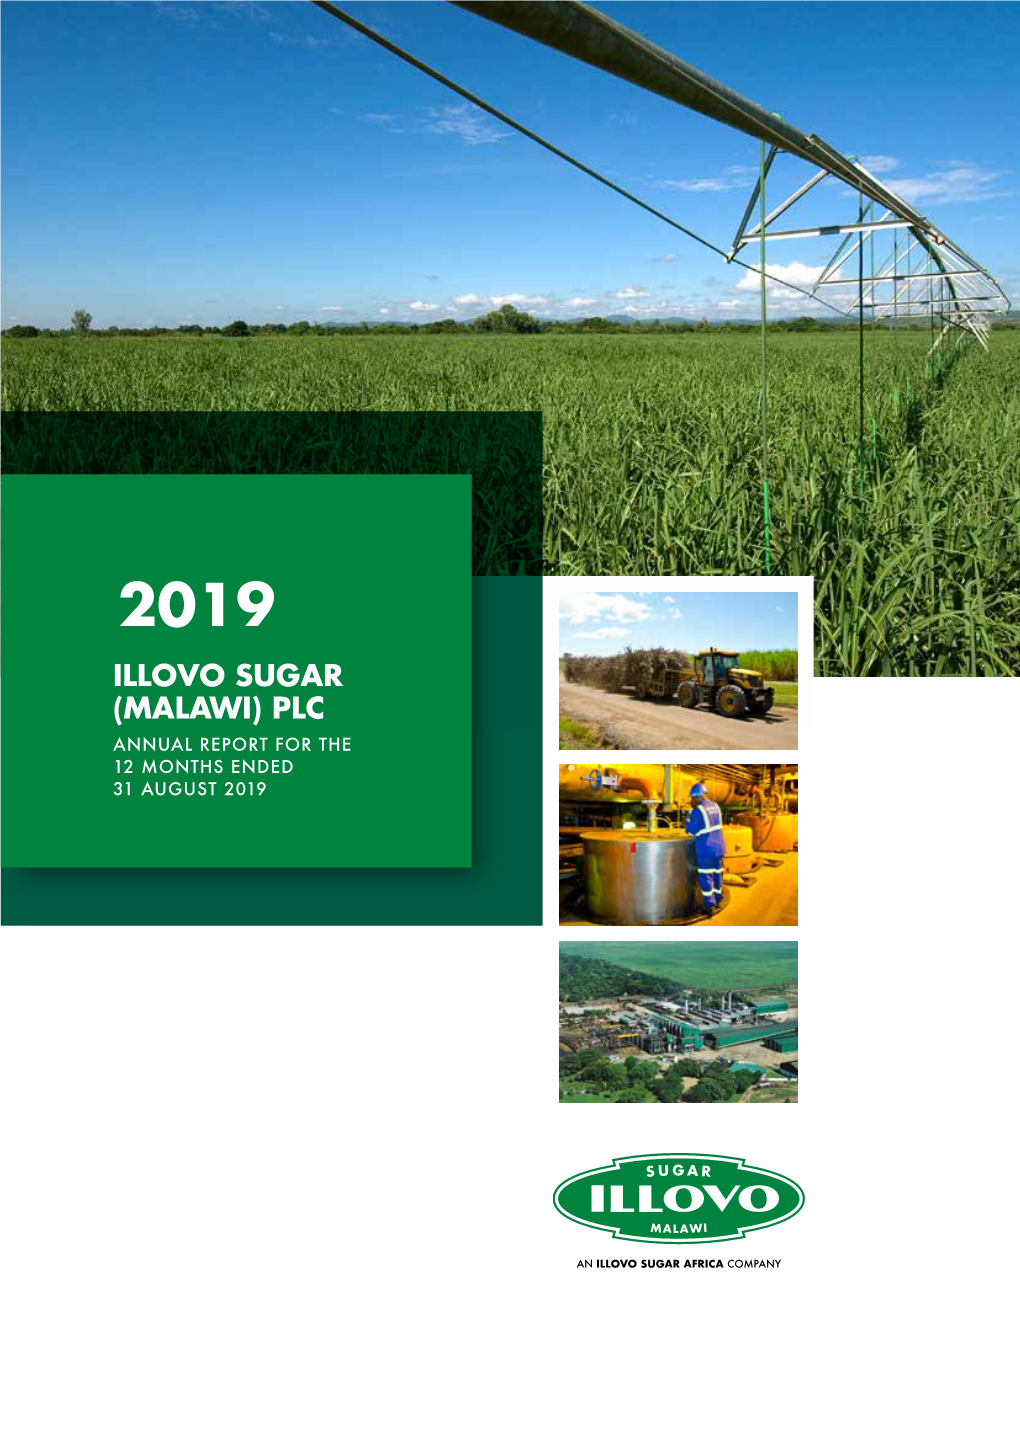 Illovo Sugar (Malawi) Plc Annual Report for the 12 Months Ended 31 August 2019